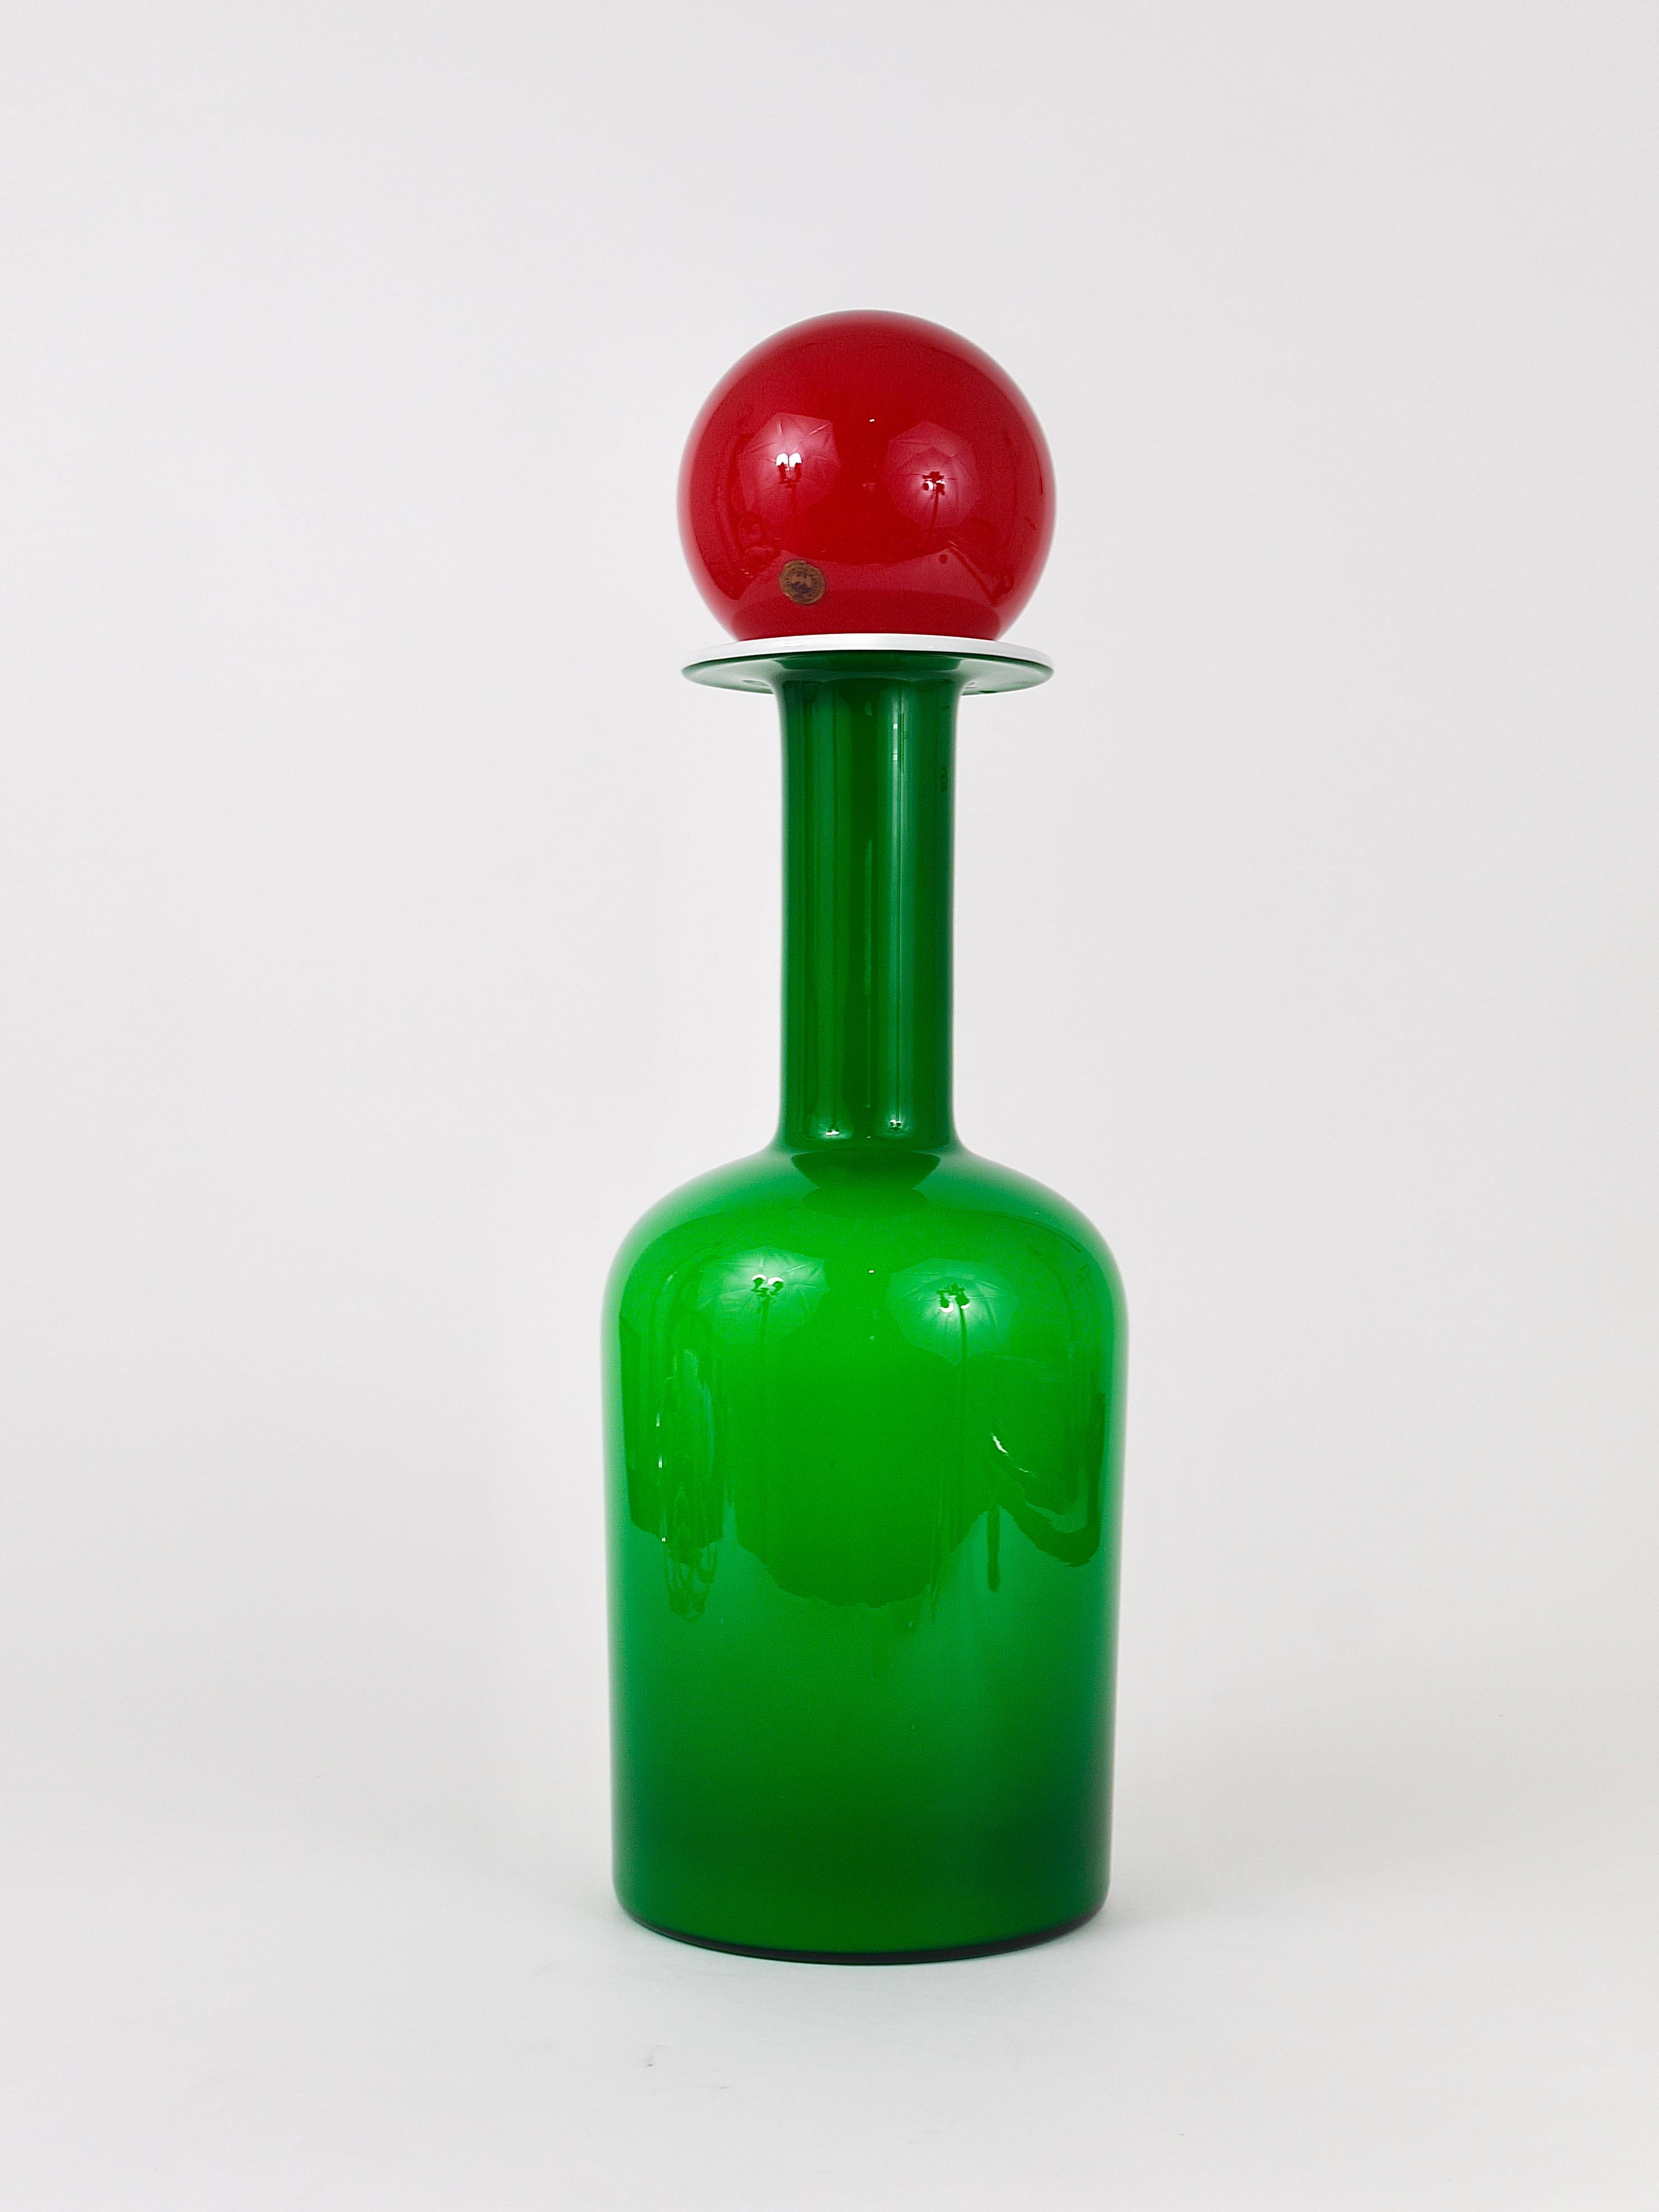 A beautiful 21.5 inches tall Danish modern Midcentury bottle vase with red ball stopper, designed by Otto Bauer in 1959, manufactured by Holmegaard Kastrup / Denmark in the 1960s. Handmade of two layers of green and white glass, gradient from green